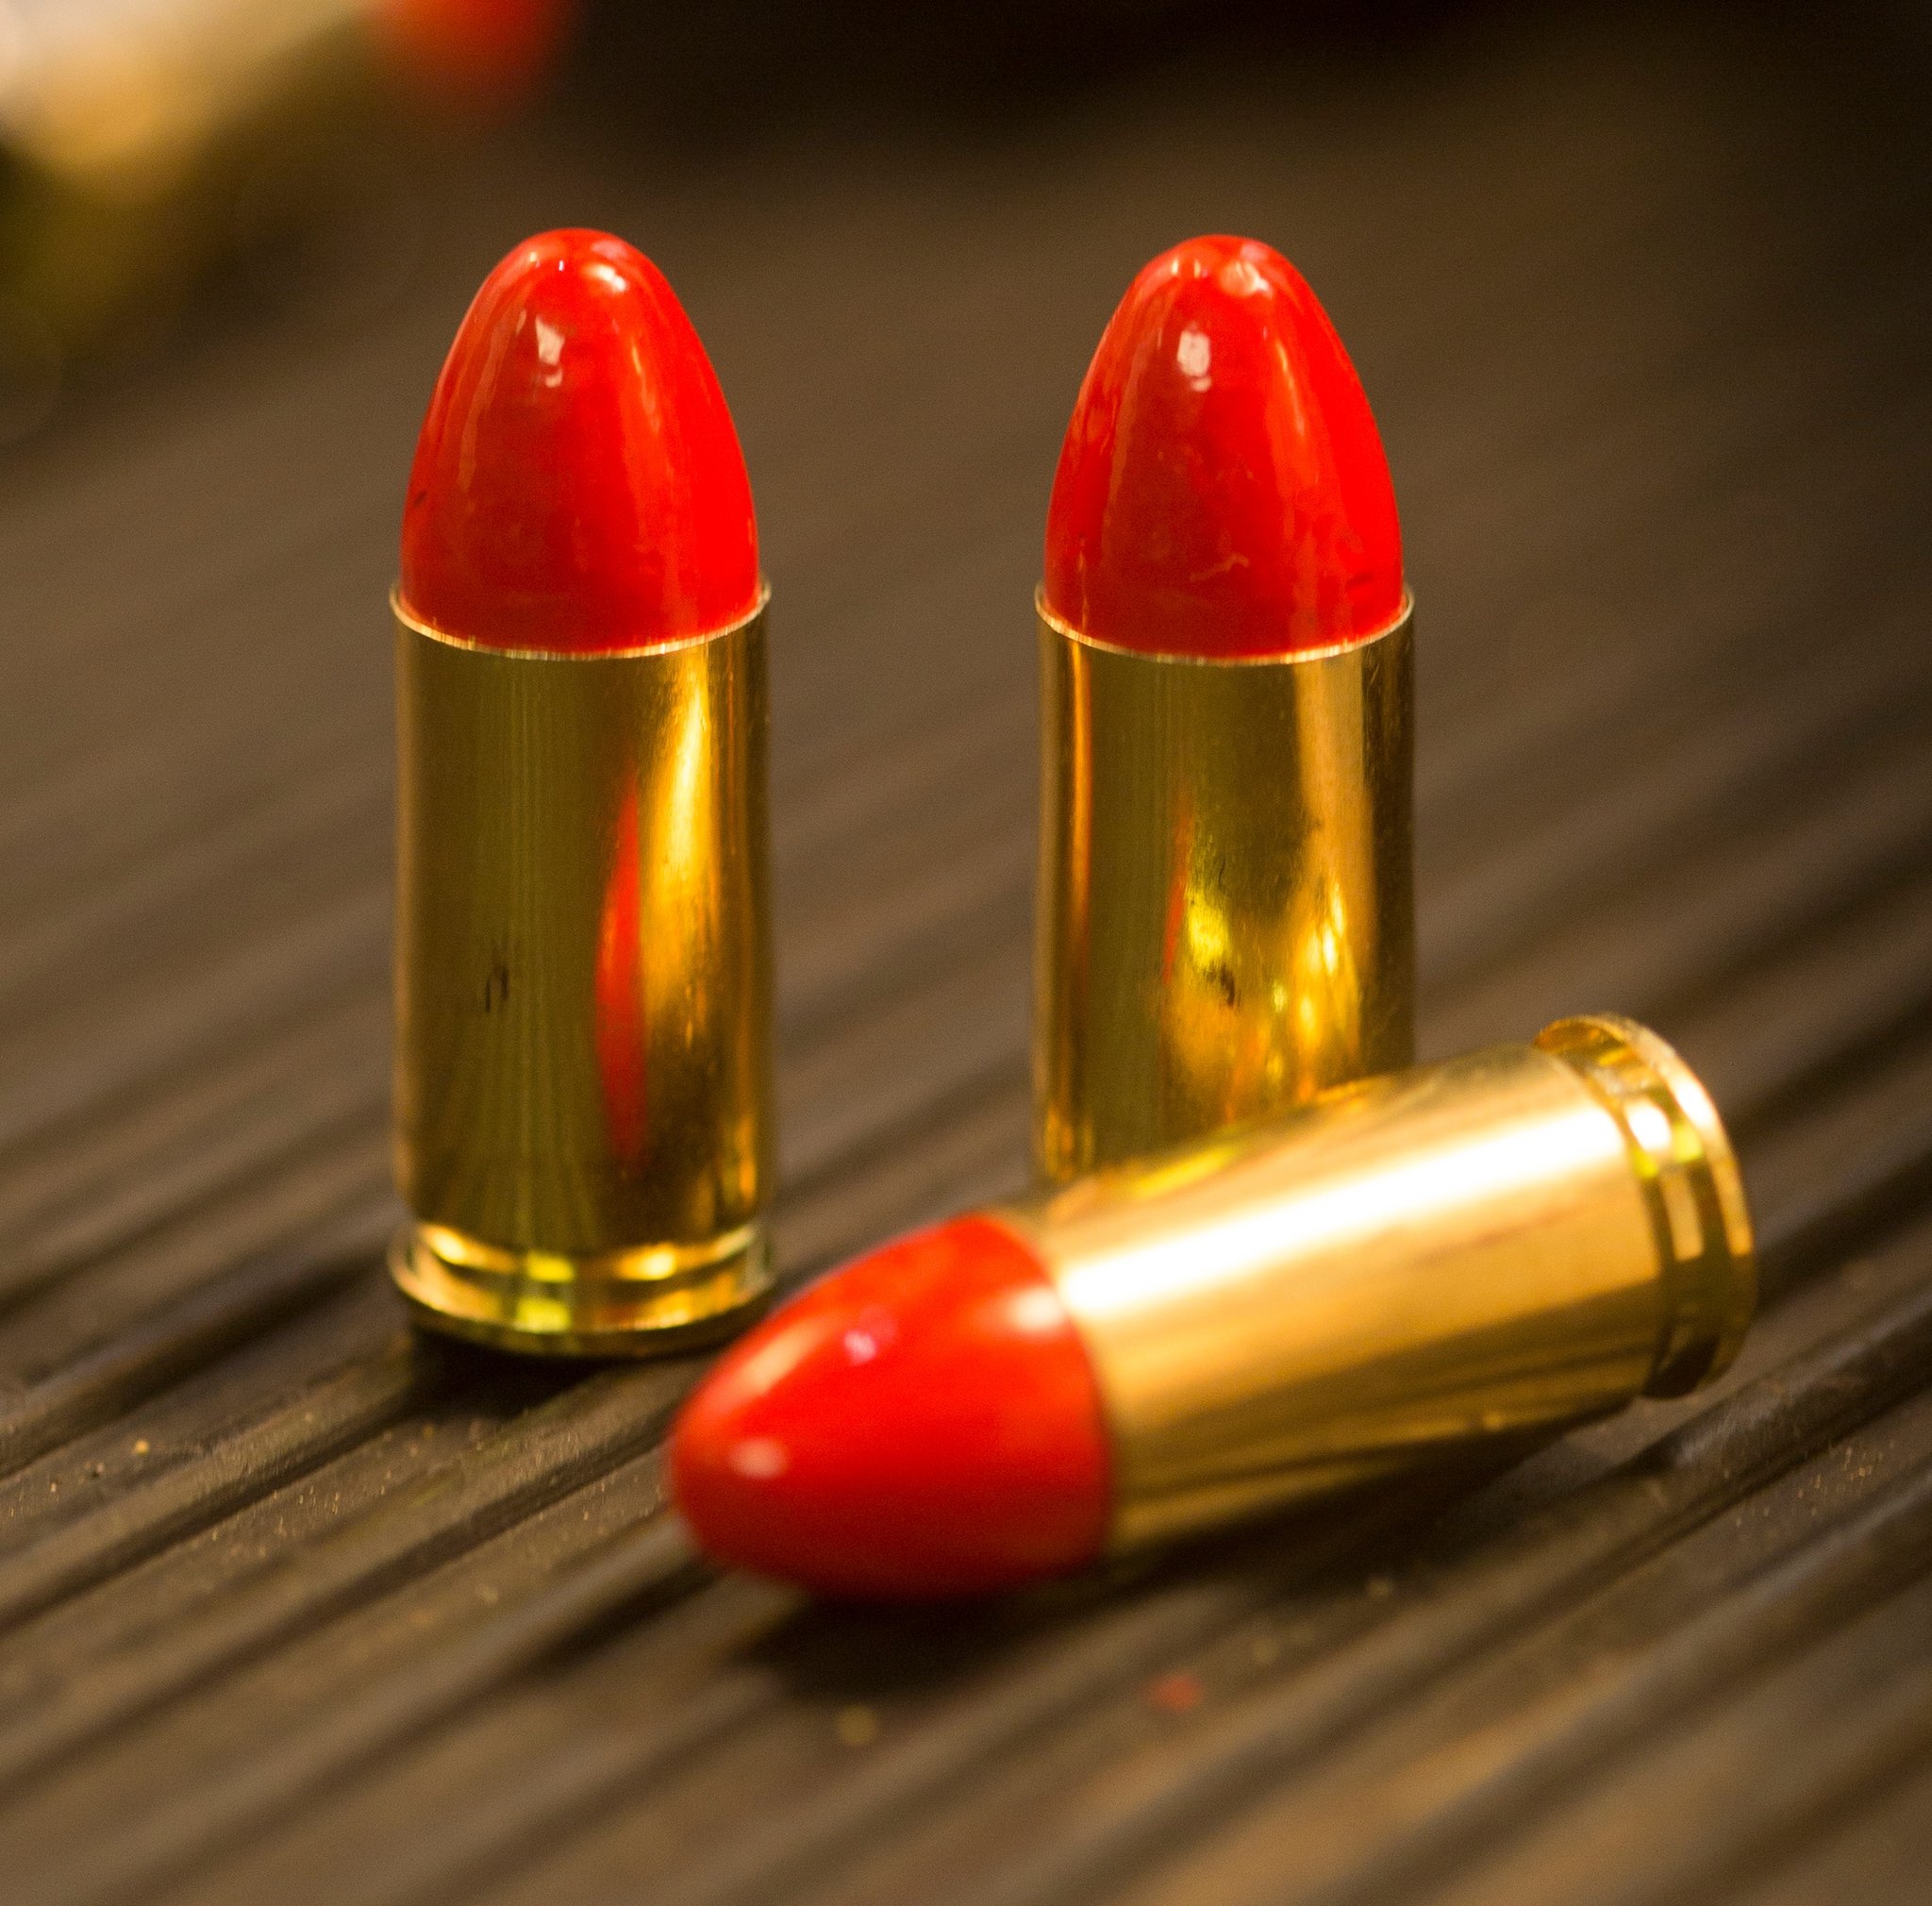 The Syntech component bullet allows handloaders to take control of their target loads. (Photo: Vista Outdoors)